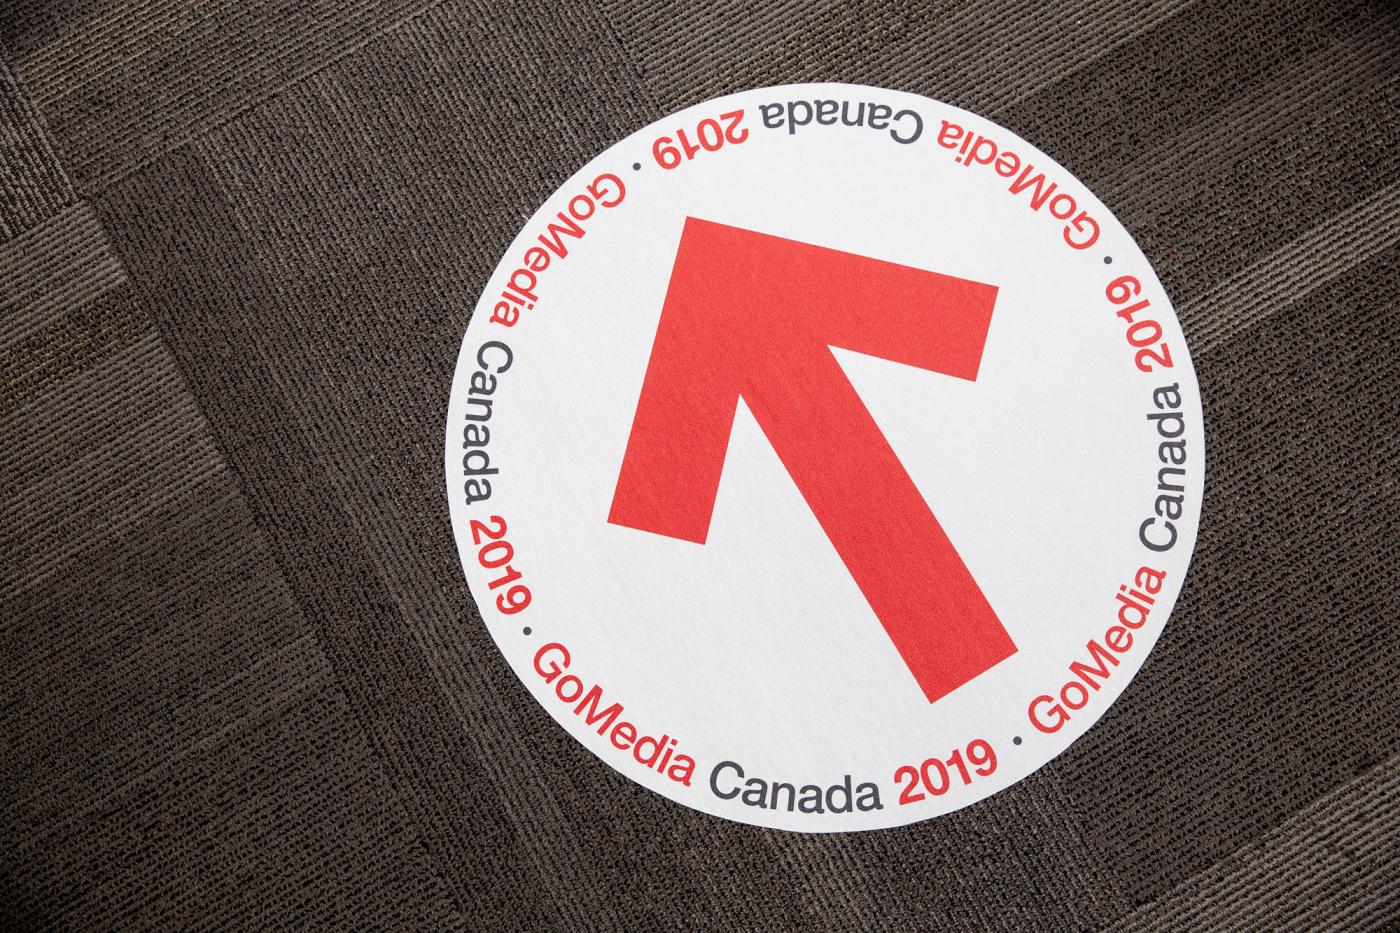 A floor decal showing a large red arrow and the event logo.